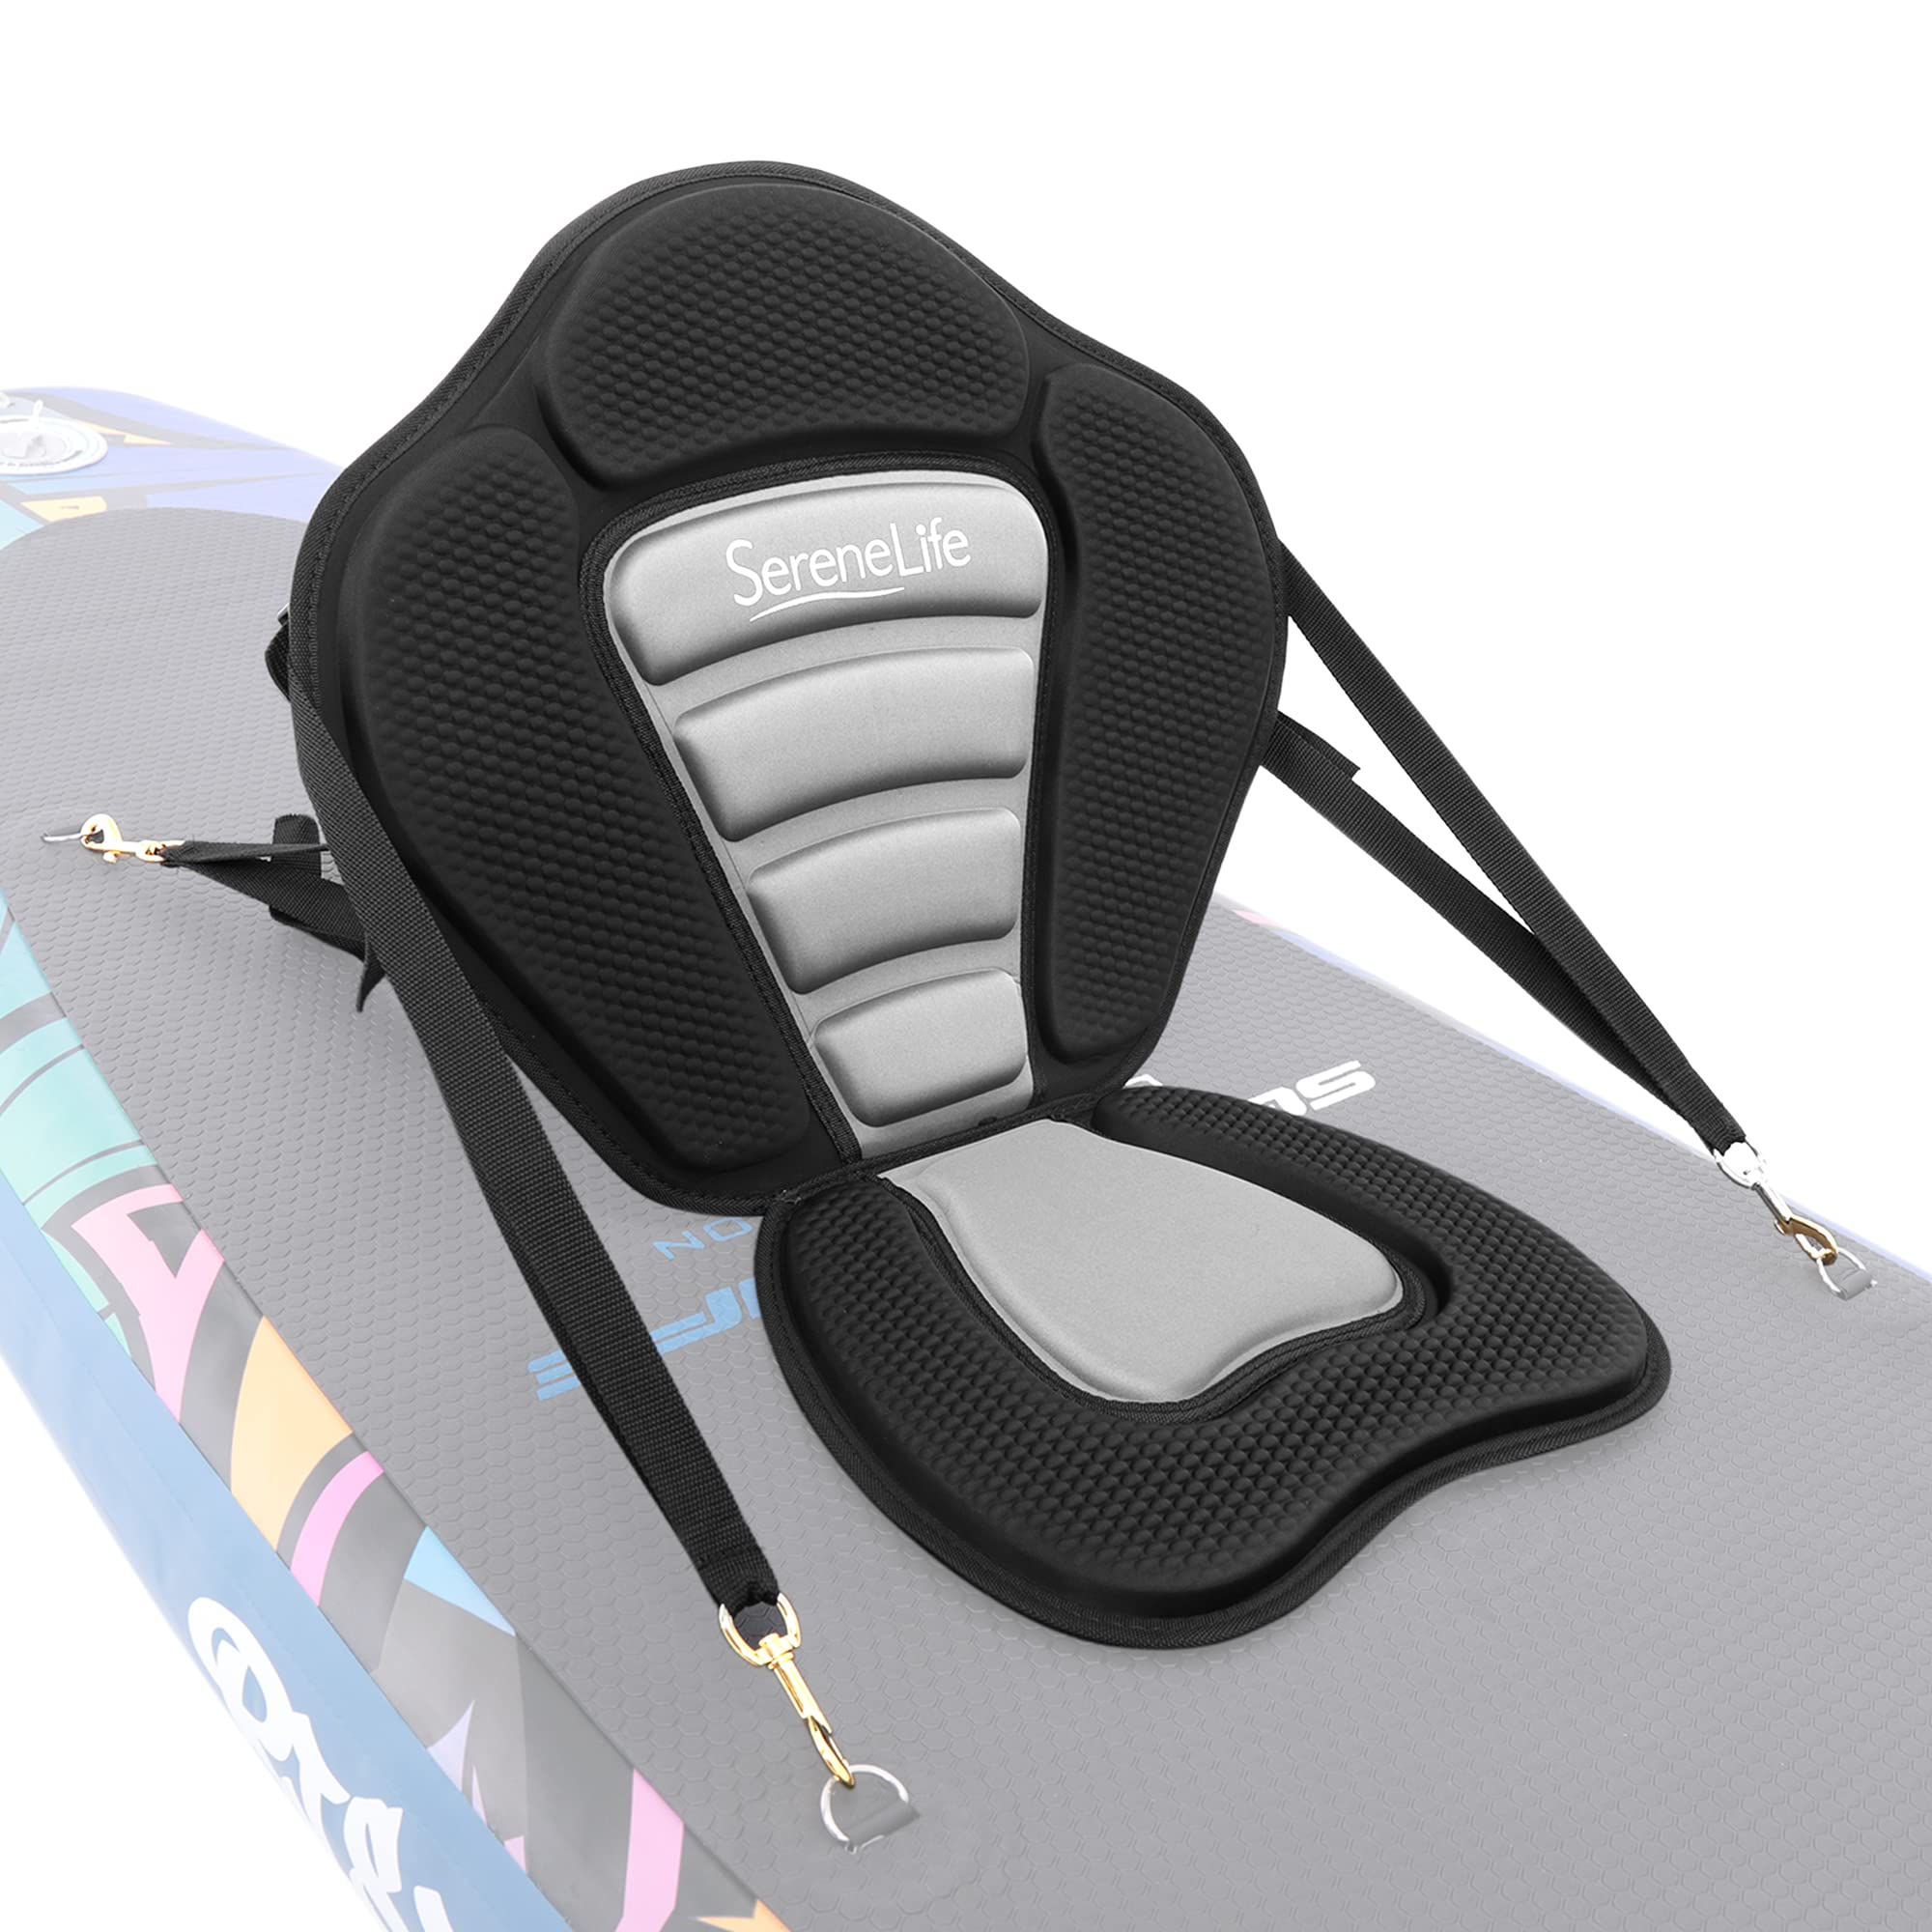 Detachable Universal Paddle-Board Seat - Adjustable Paddle Board Seat, Form-Fitting Design for All Body Sizes, Large & Small, Compatible for Kayaks, Rowboats, Fishing Boats - SereneLife SLSUPST15